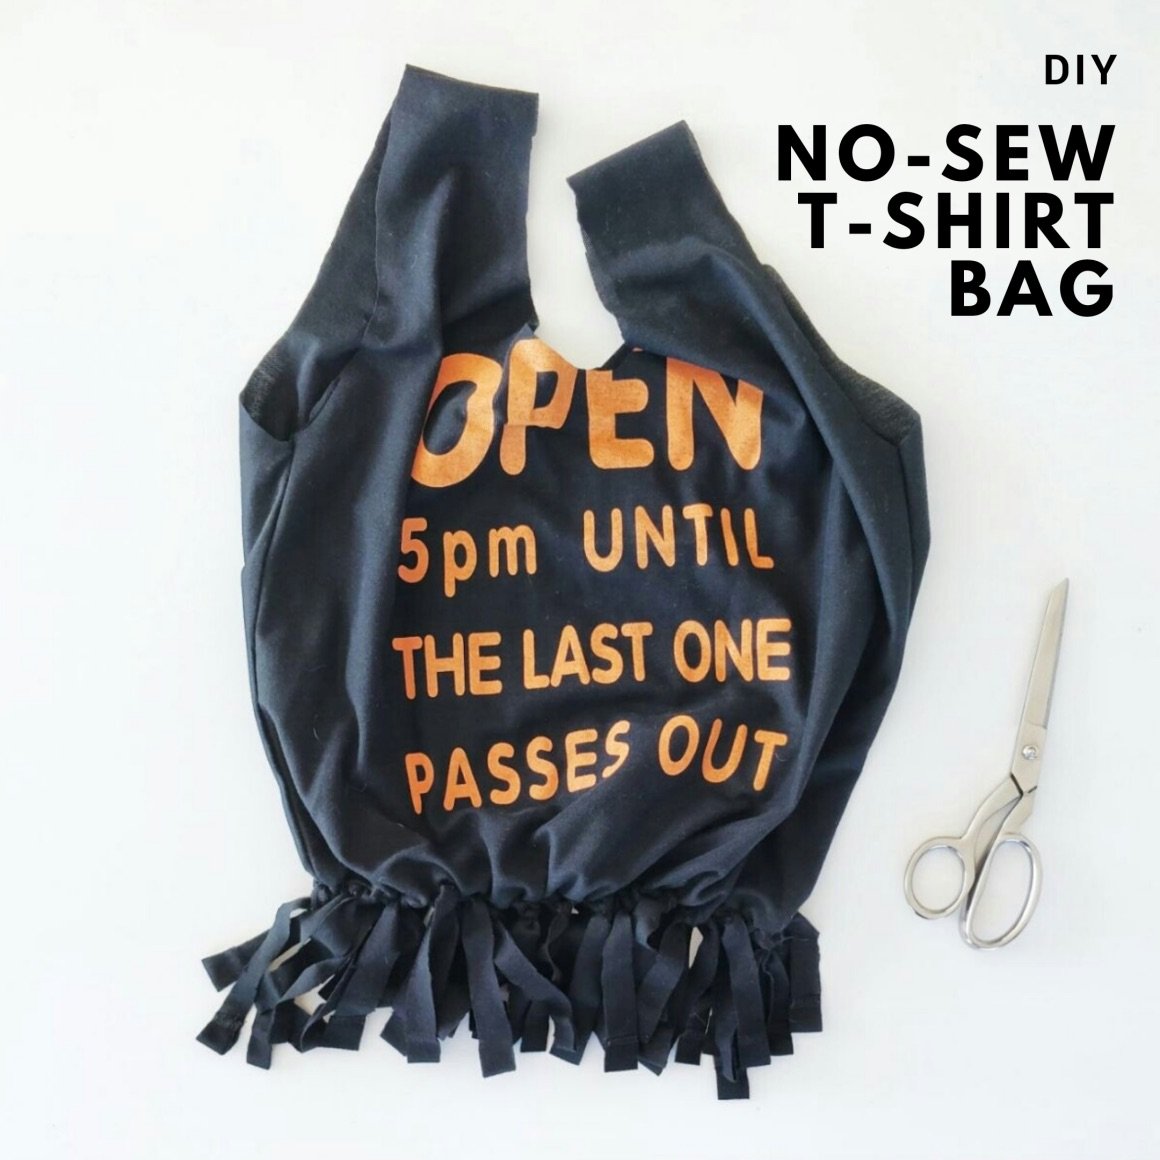 DIY No Sew Produce Bag from and Old T-Shirt - YouTube